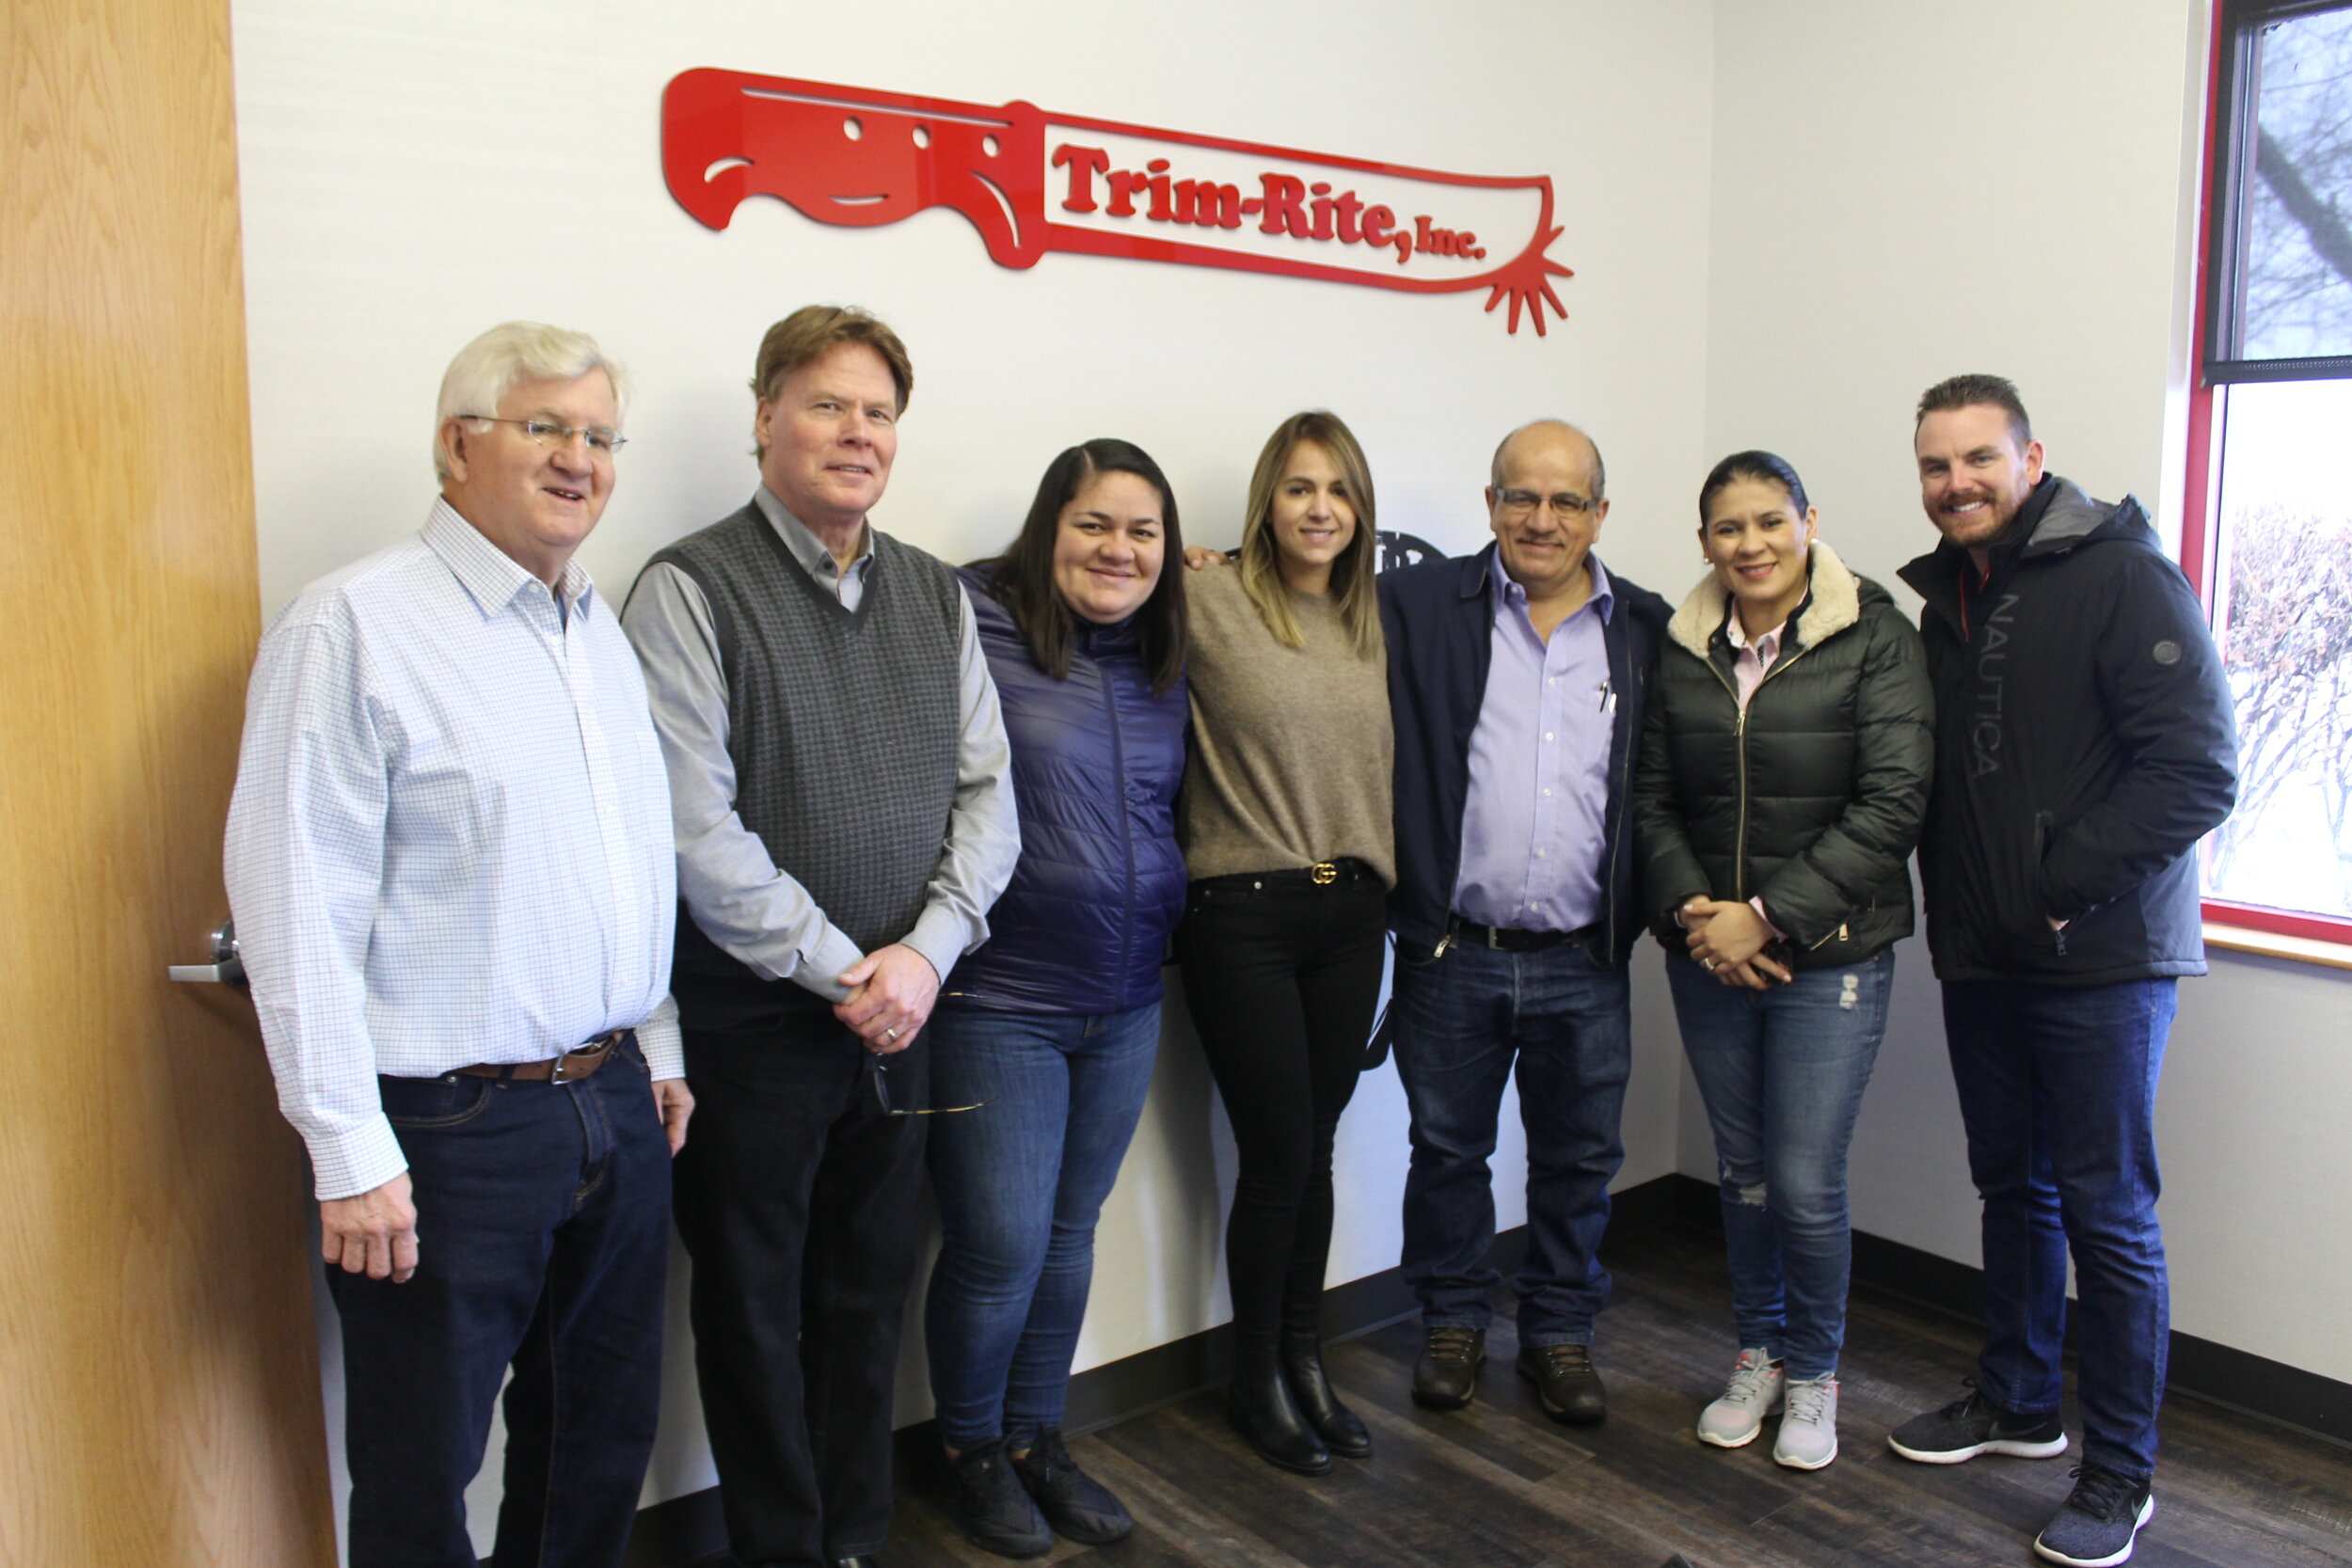  They traveled all the way from Costa Rica to meet us! We are always so appreciative for our partners who take the time to come and learn about how their products are made! Send some sunshine back our way! 